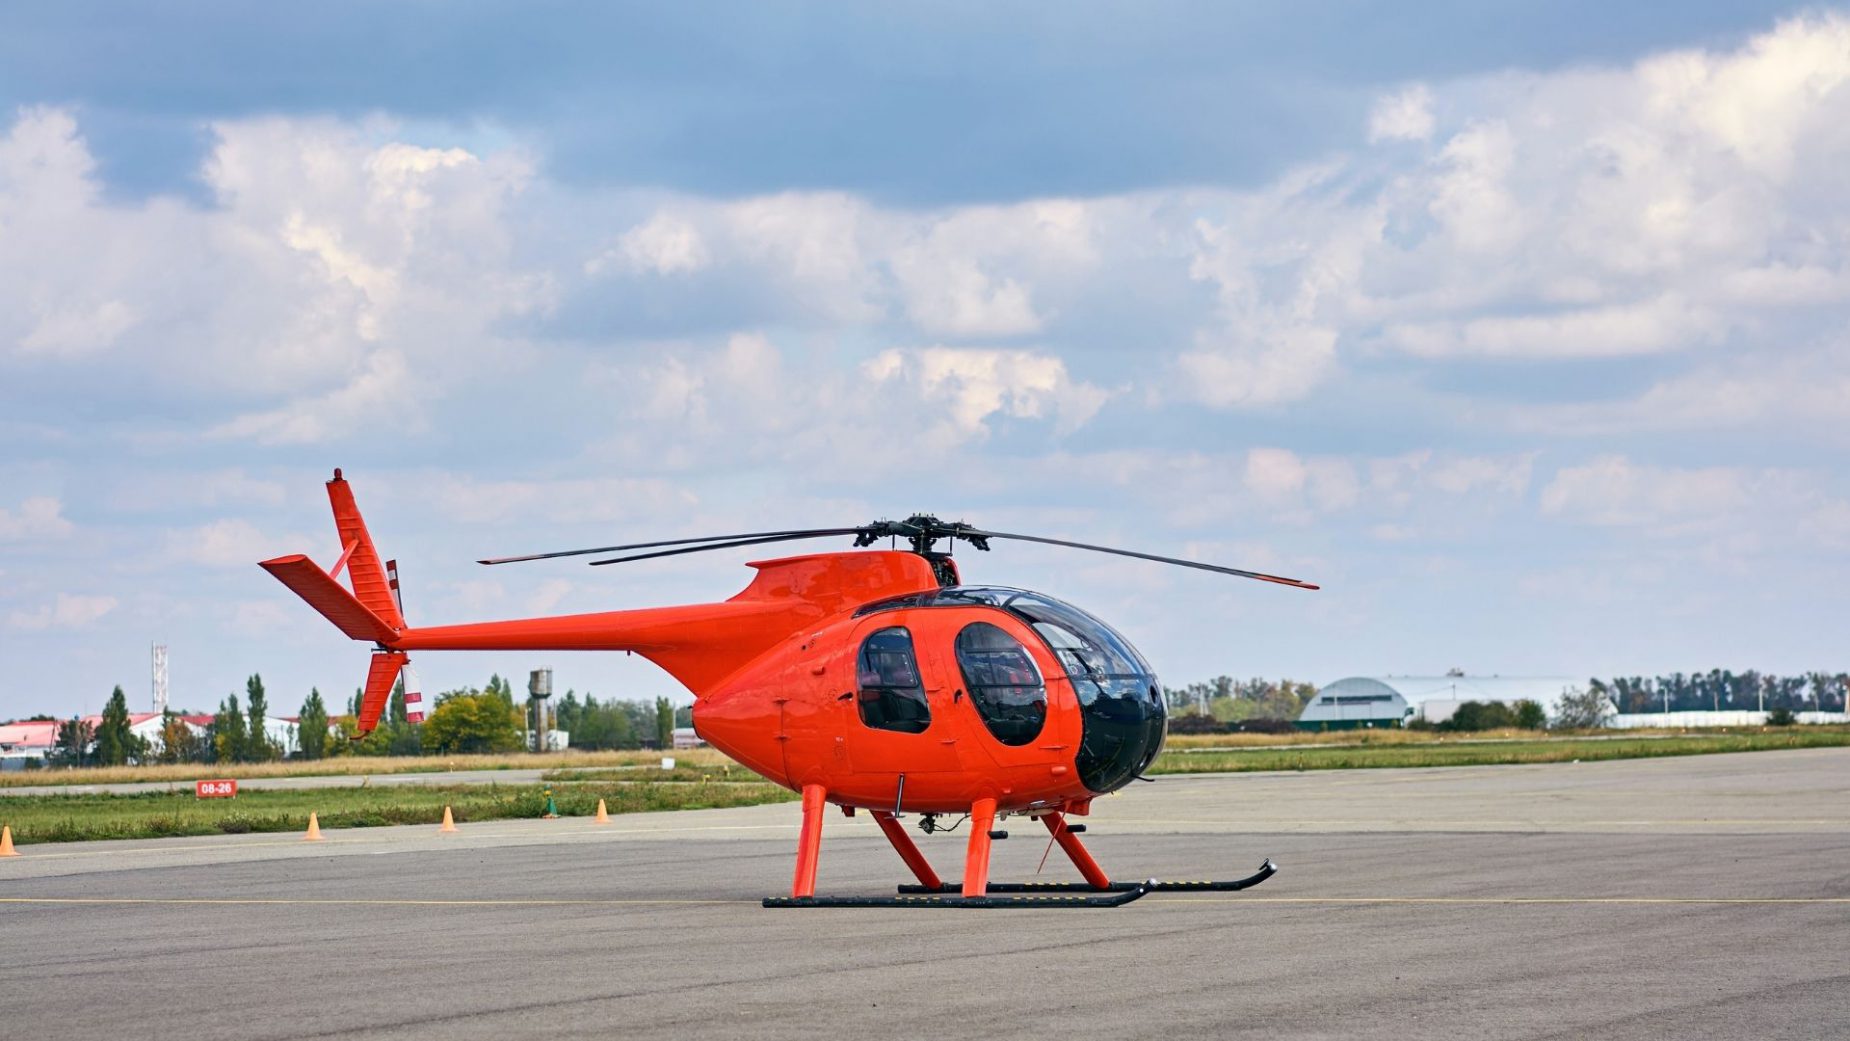 Global Commercial Helicopters Market Outlook, Opportunities And Strategies